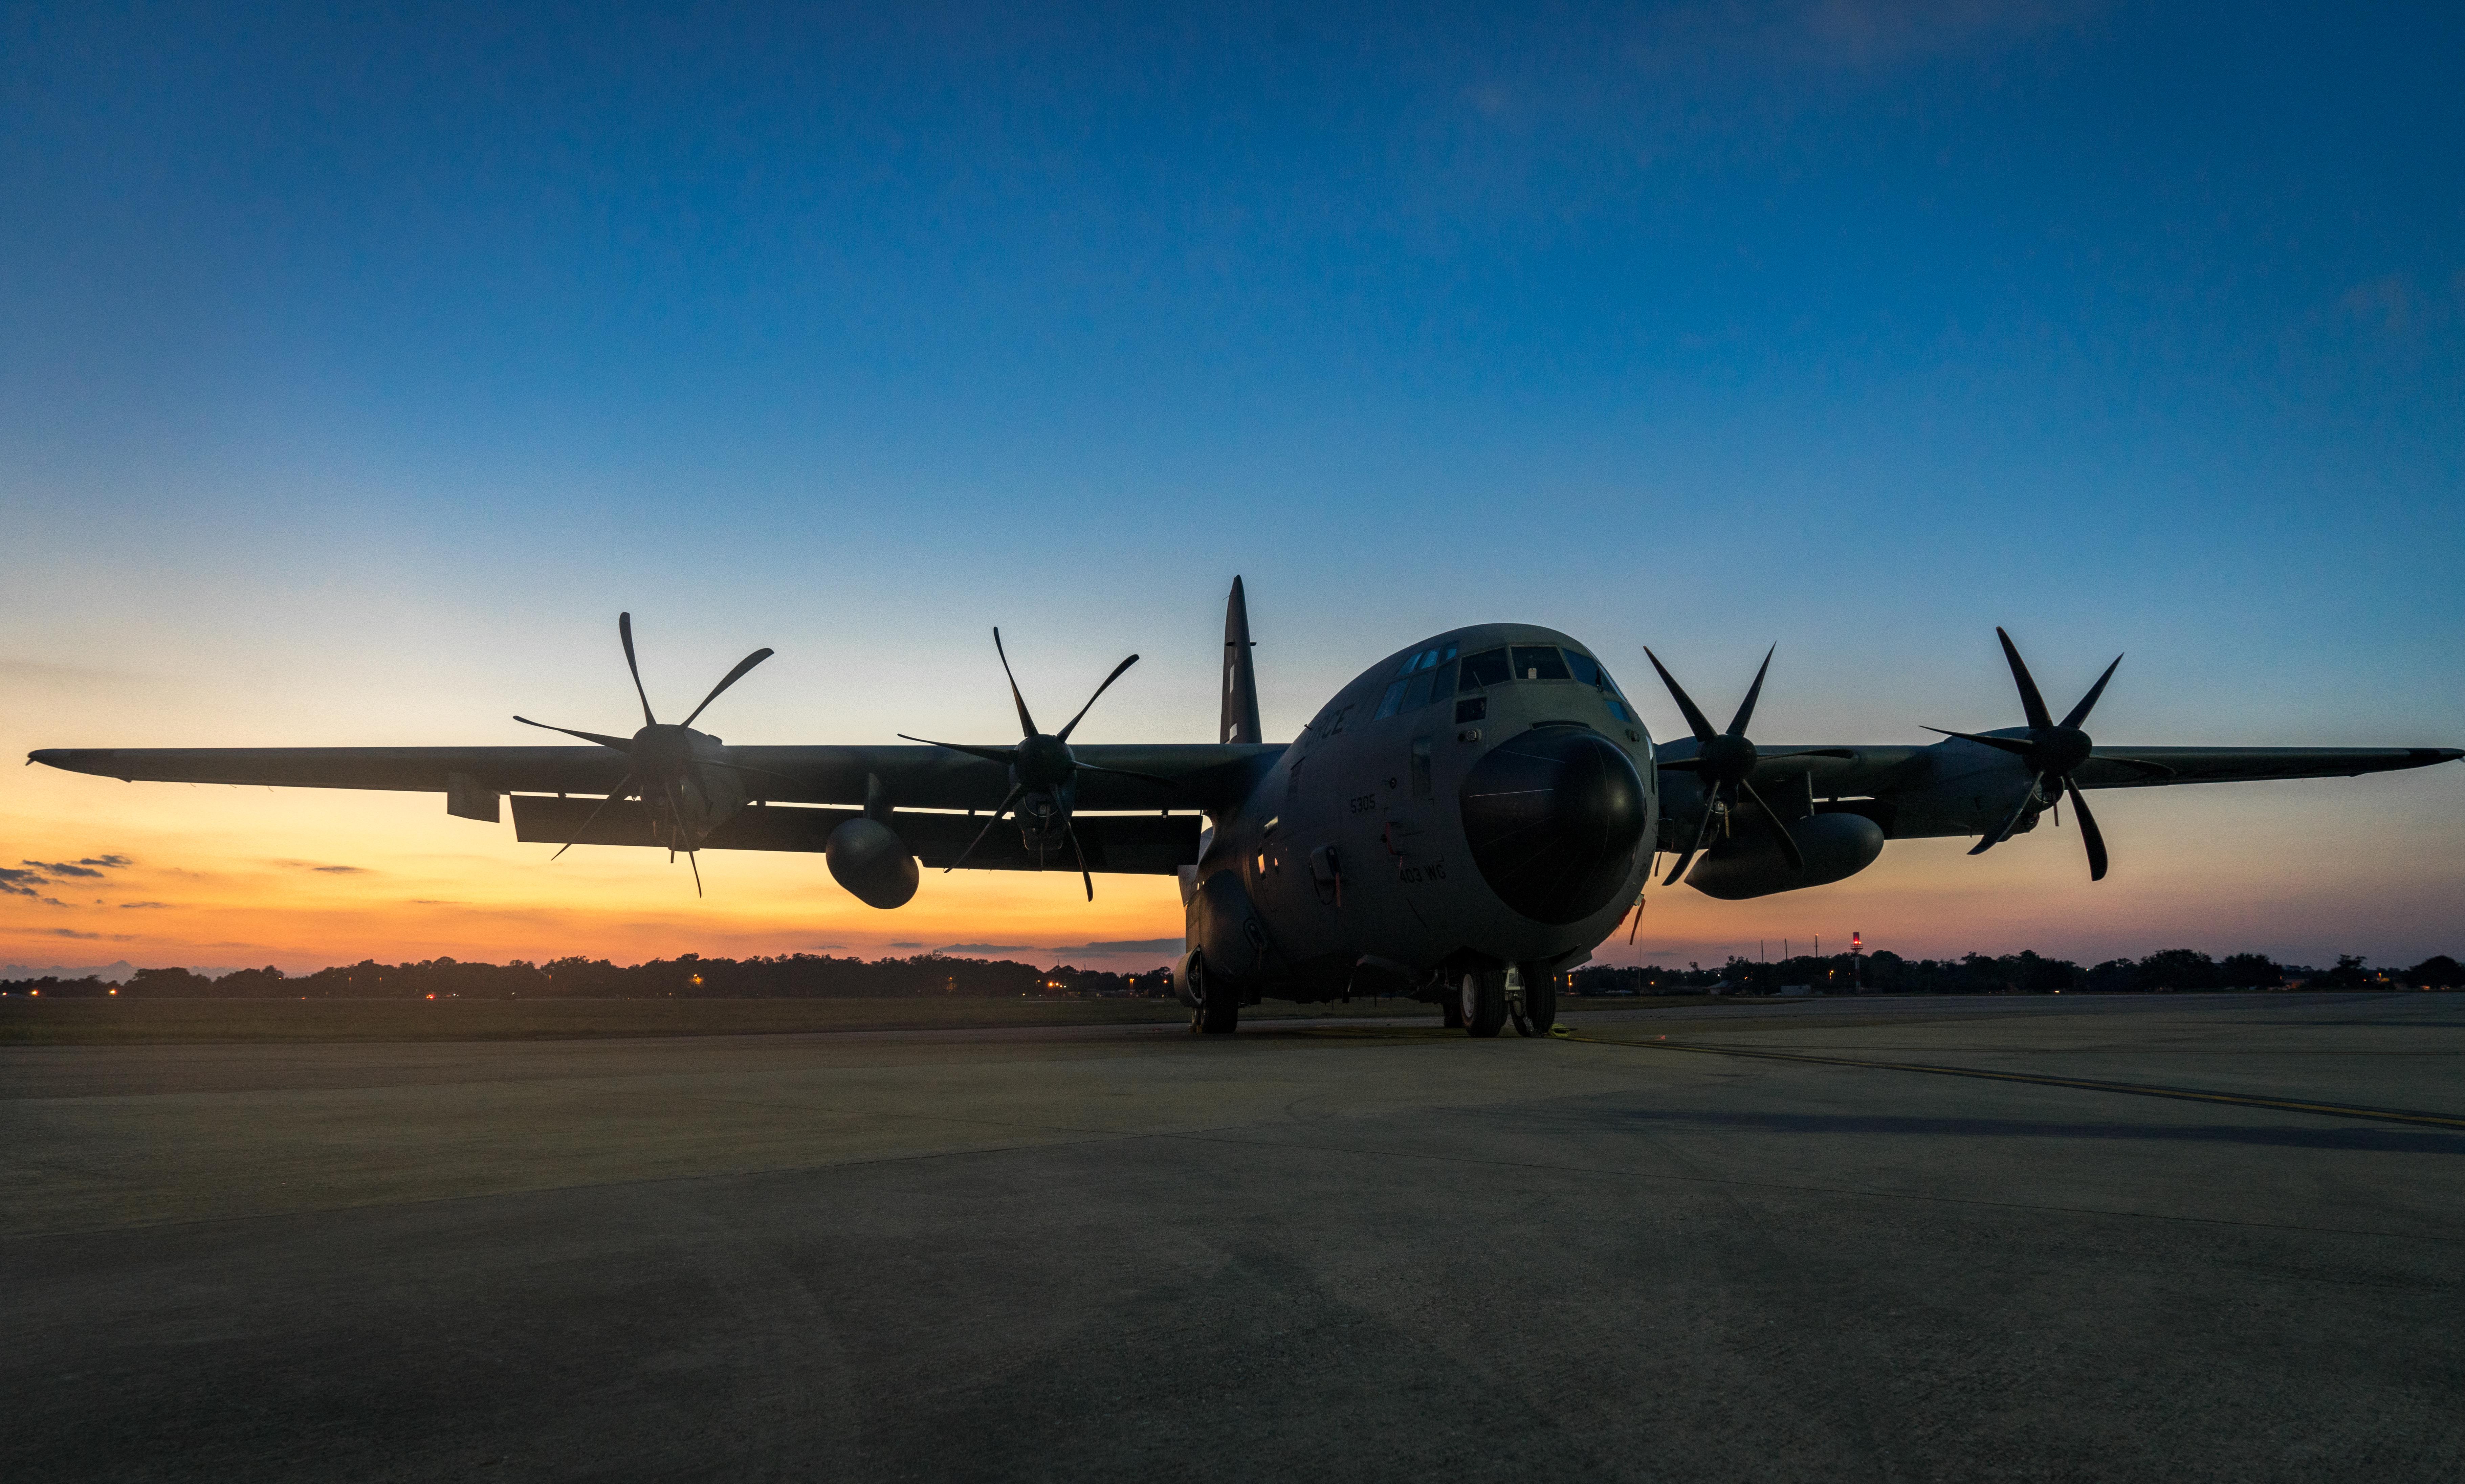 A 403rd Wing WC-130J Super Hercules aircraft is parked on the Keesler Air Force Base flight line as the sun sets. (U.S. Air Force photo/Staff Sgt. Shelton Sherrill)